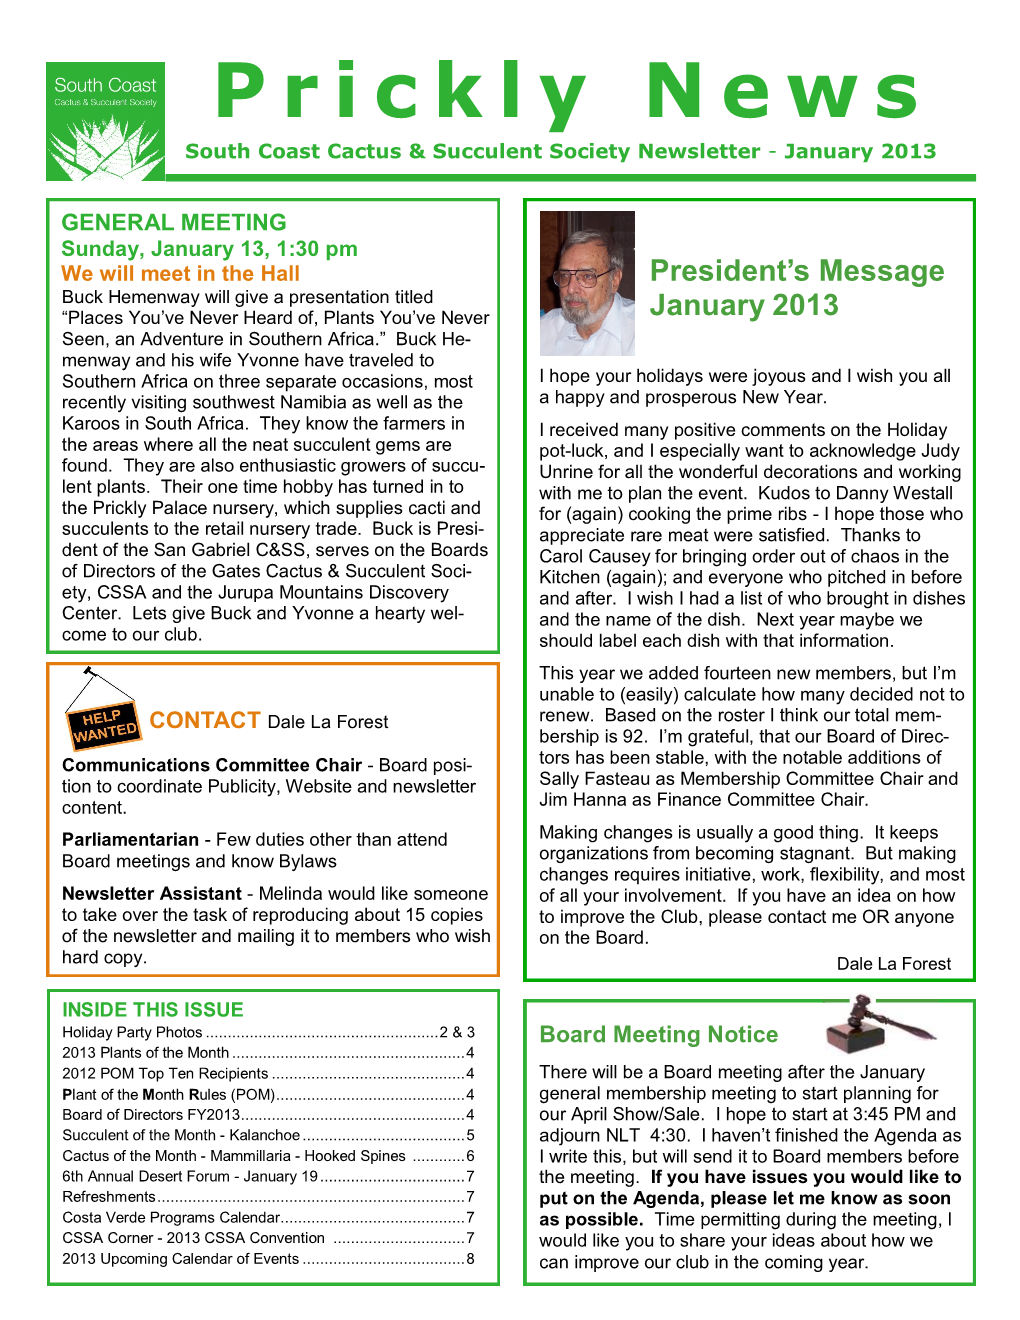 Prickly News South Coast Cactus & Succulent Society Newsletter - January 2013